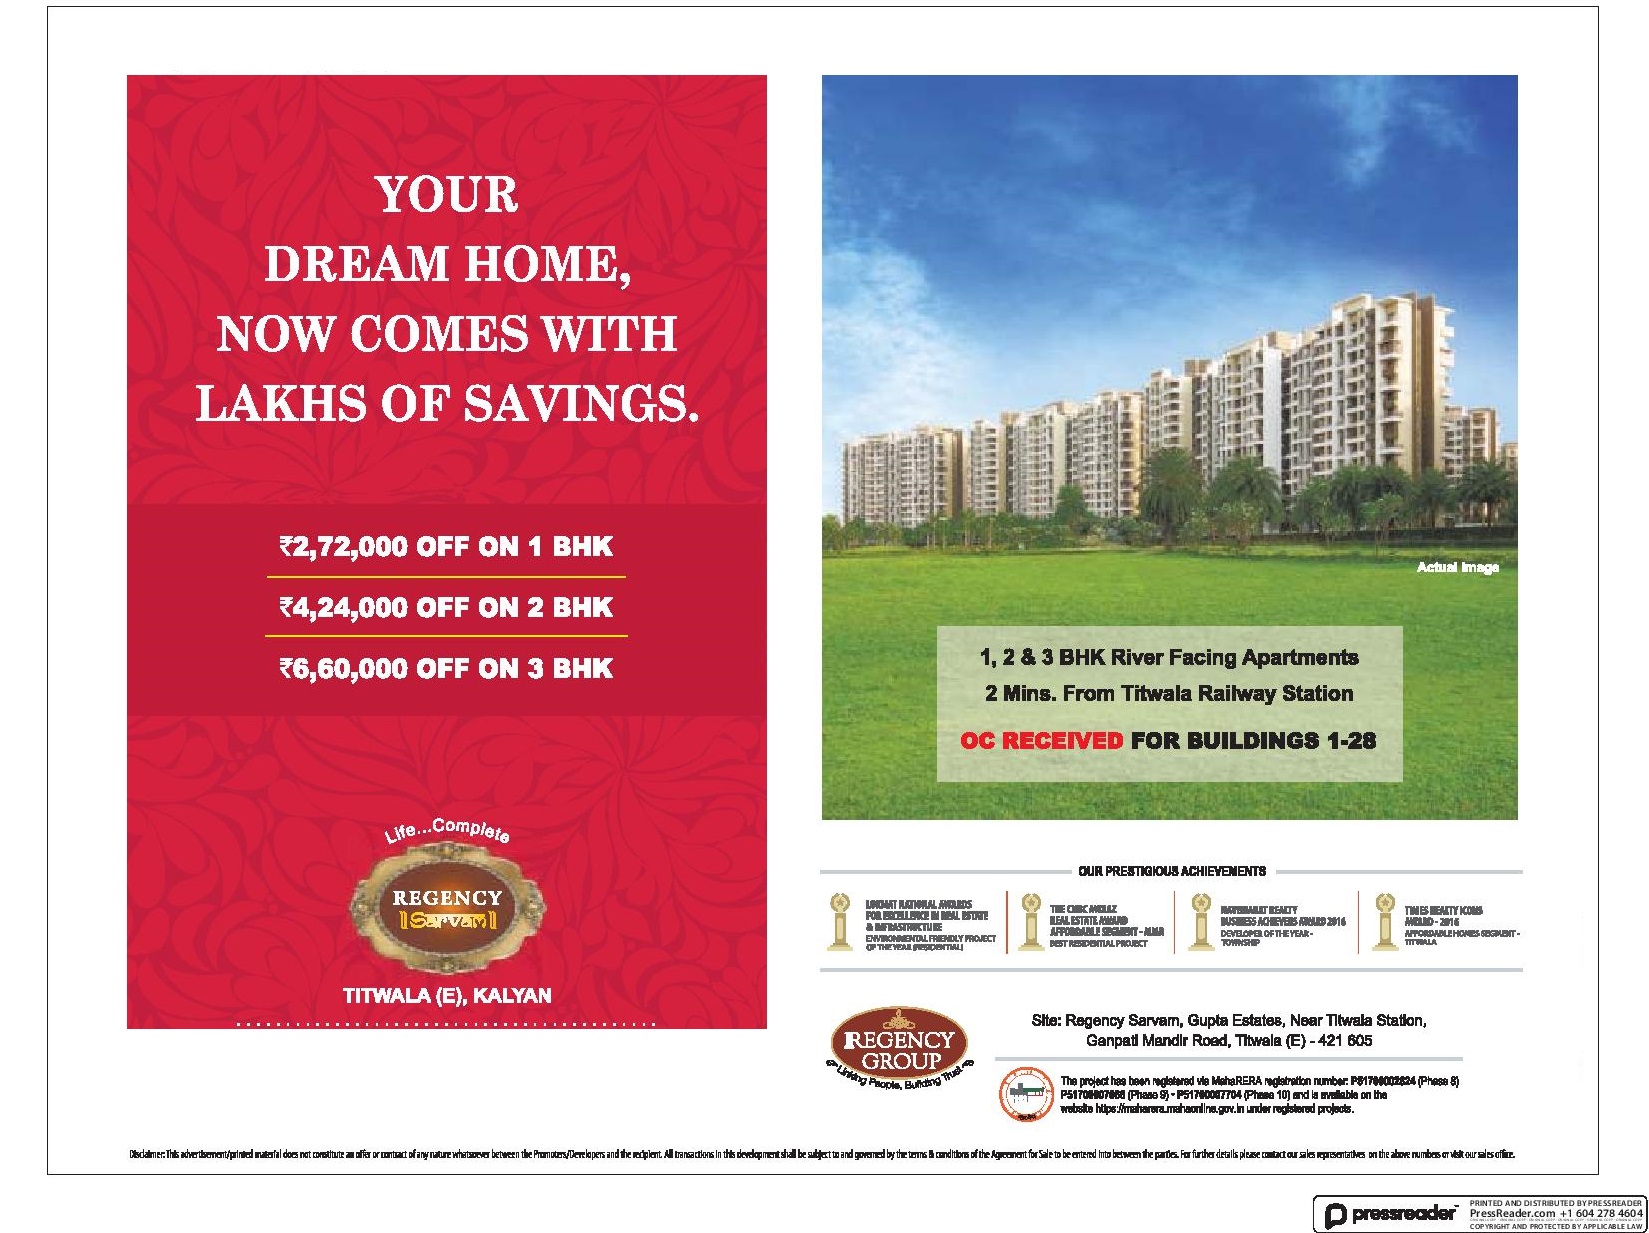 Save Lakhs of rupees by booking your dream home at Regency Sarvam in Mumbai Update